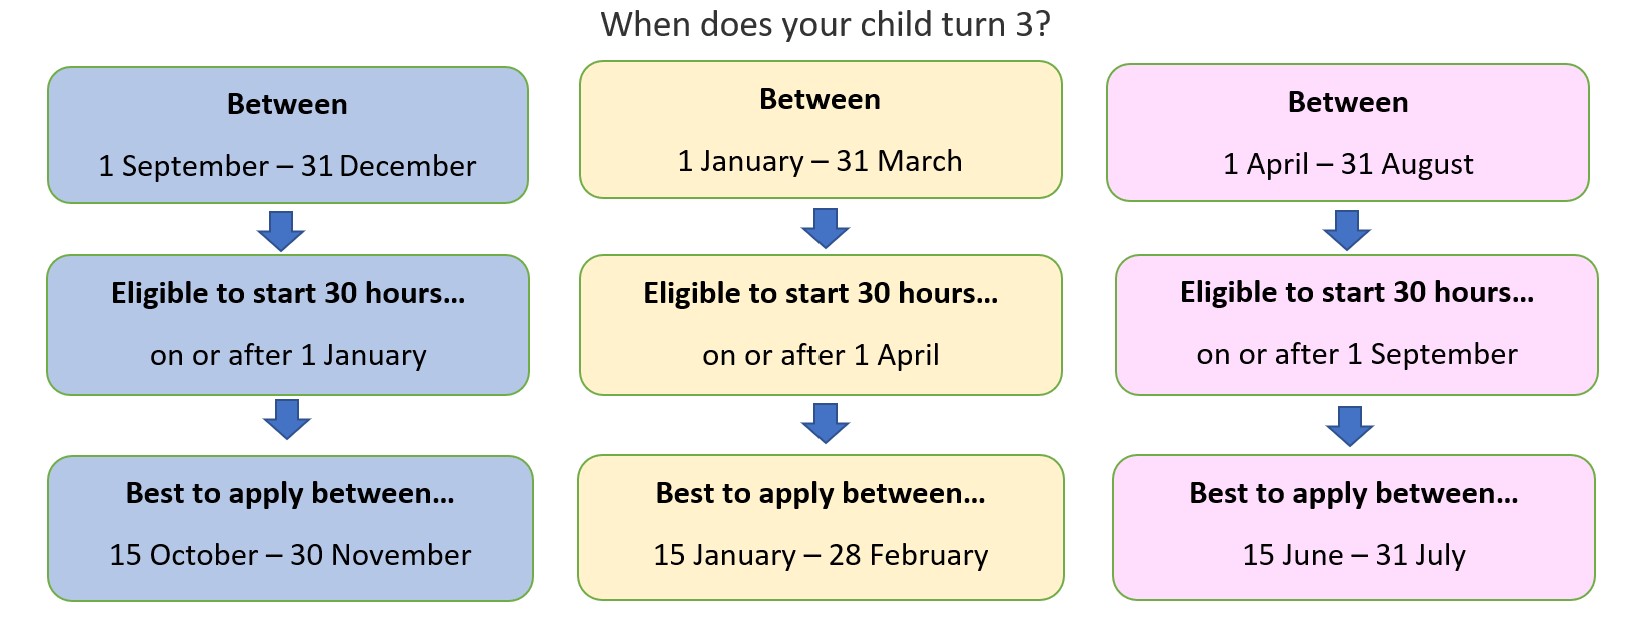 If your child turns 3 between 1 January and 31 March – they can get a 30 hour place from April but only if you applied for your code before 31 March. If your child turns 3 between 1 April and 31 August – they can get a 30 hour place from September but only if you applied for your code before 31 August. If your child turns 3 between 1 September and 31 December – they can get a 30 hour place from January but only if you applied for your code before 31 December